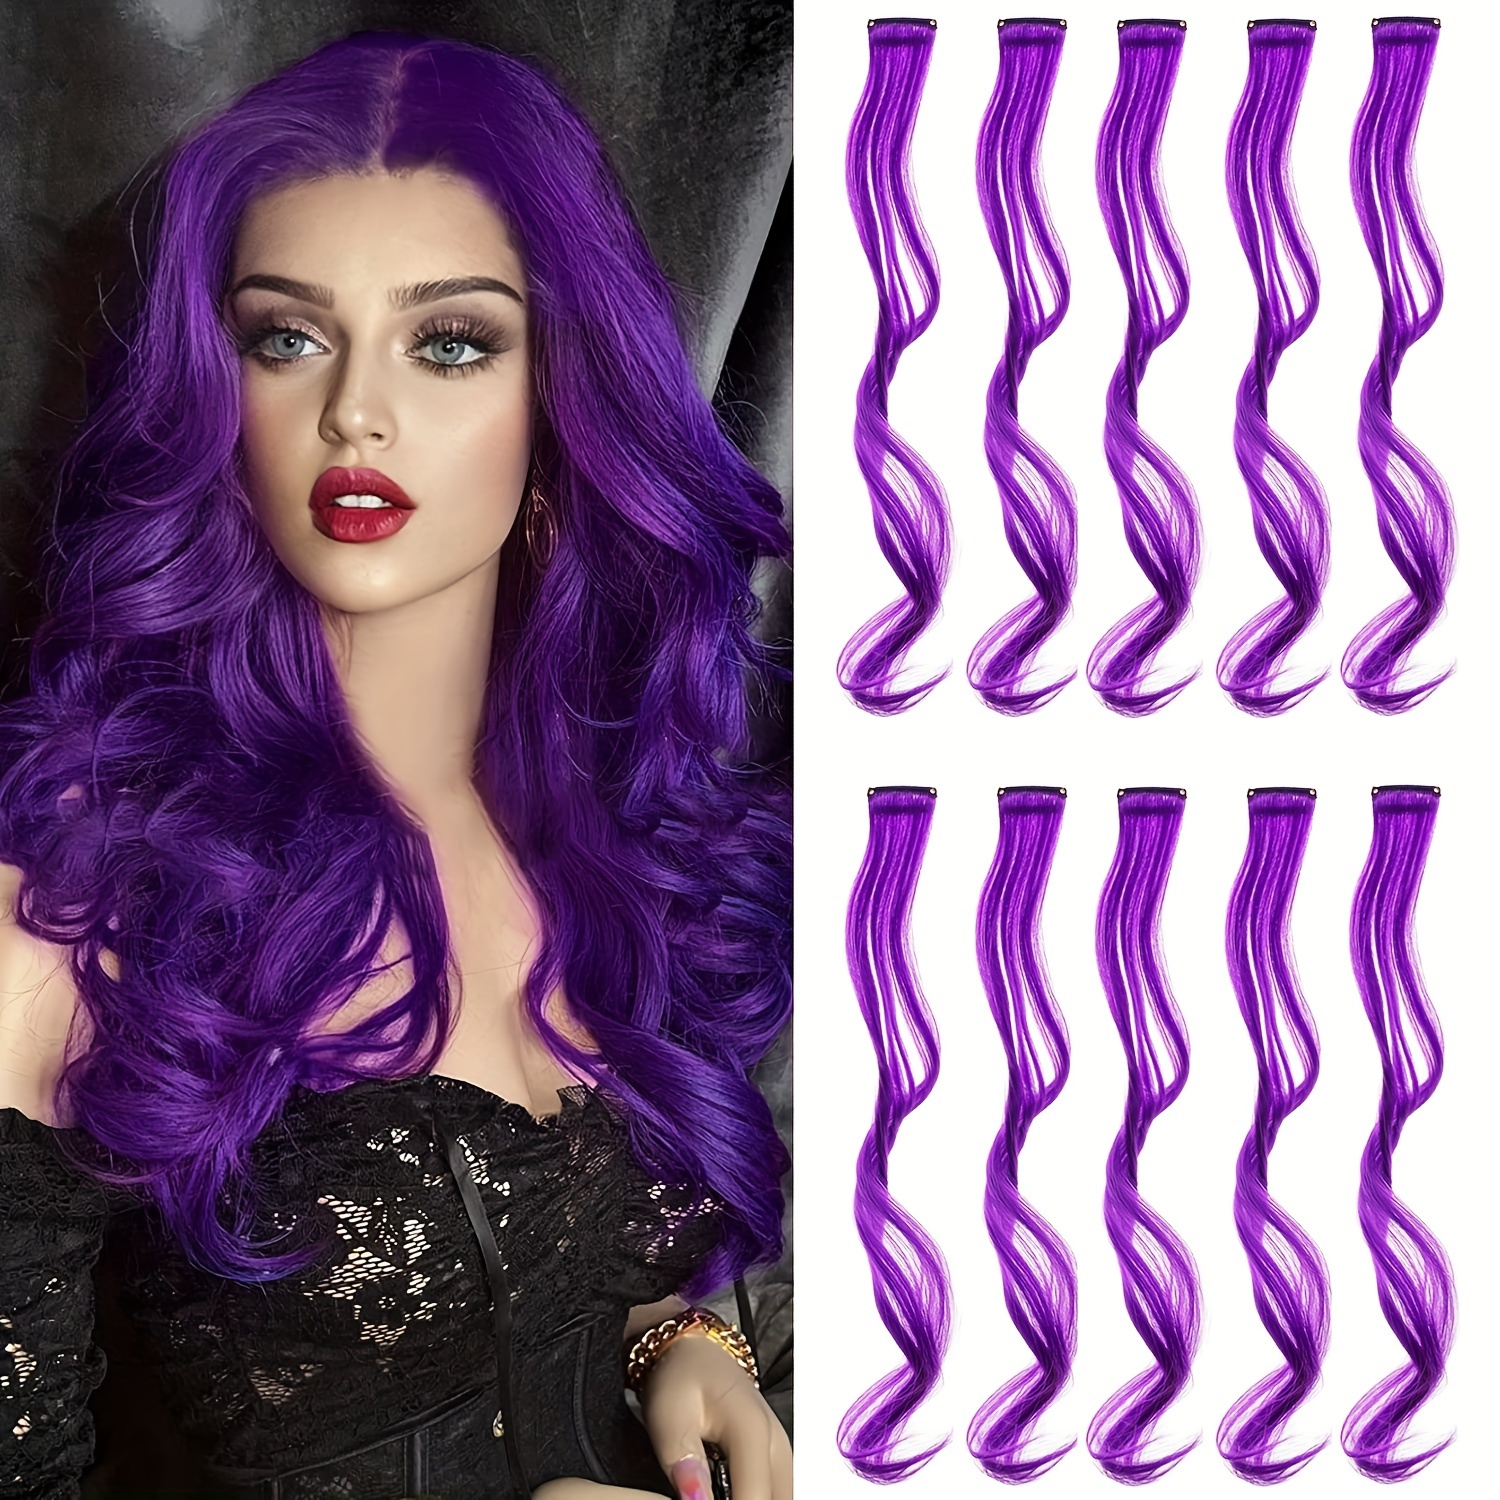 5pcs/set Y2K Long Curly Hair Extensions Party Highlight Multi